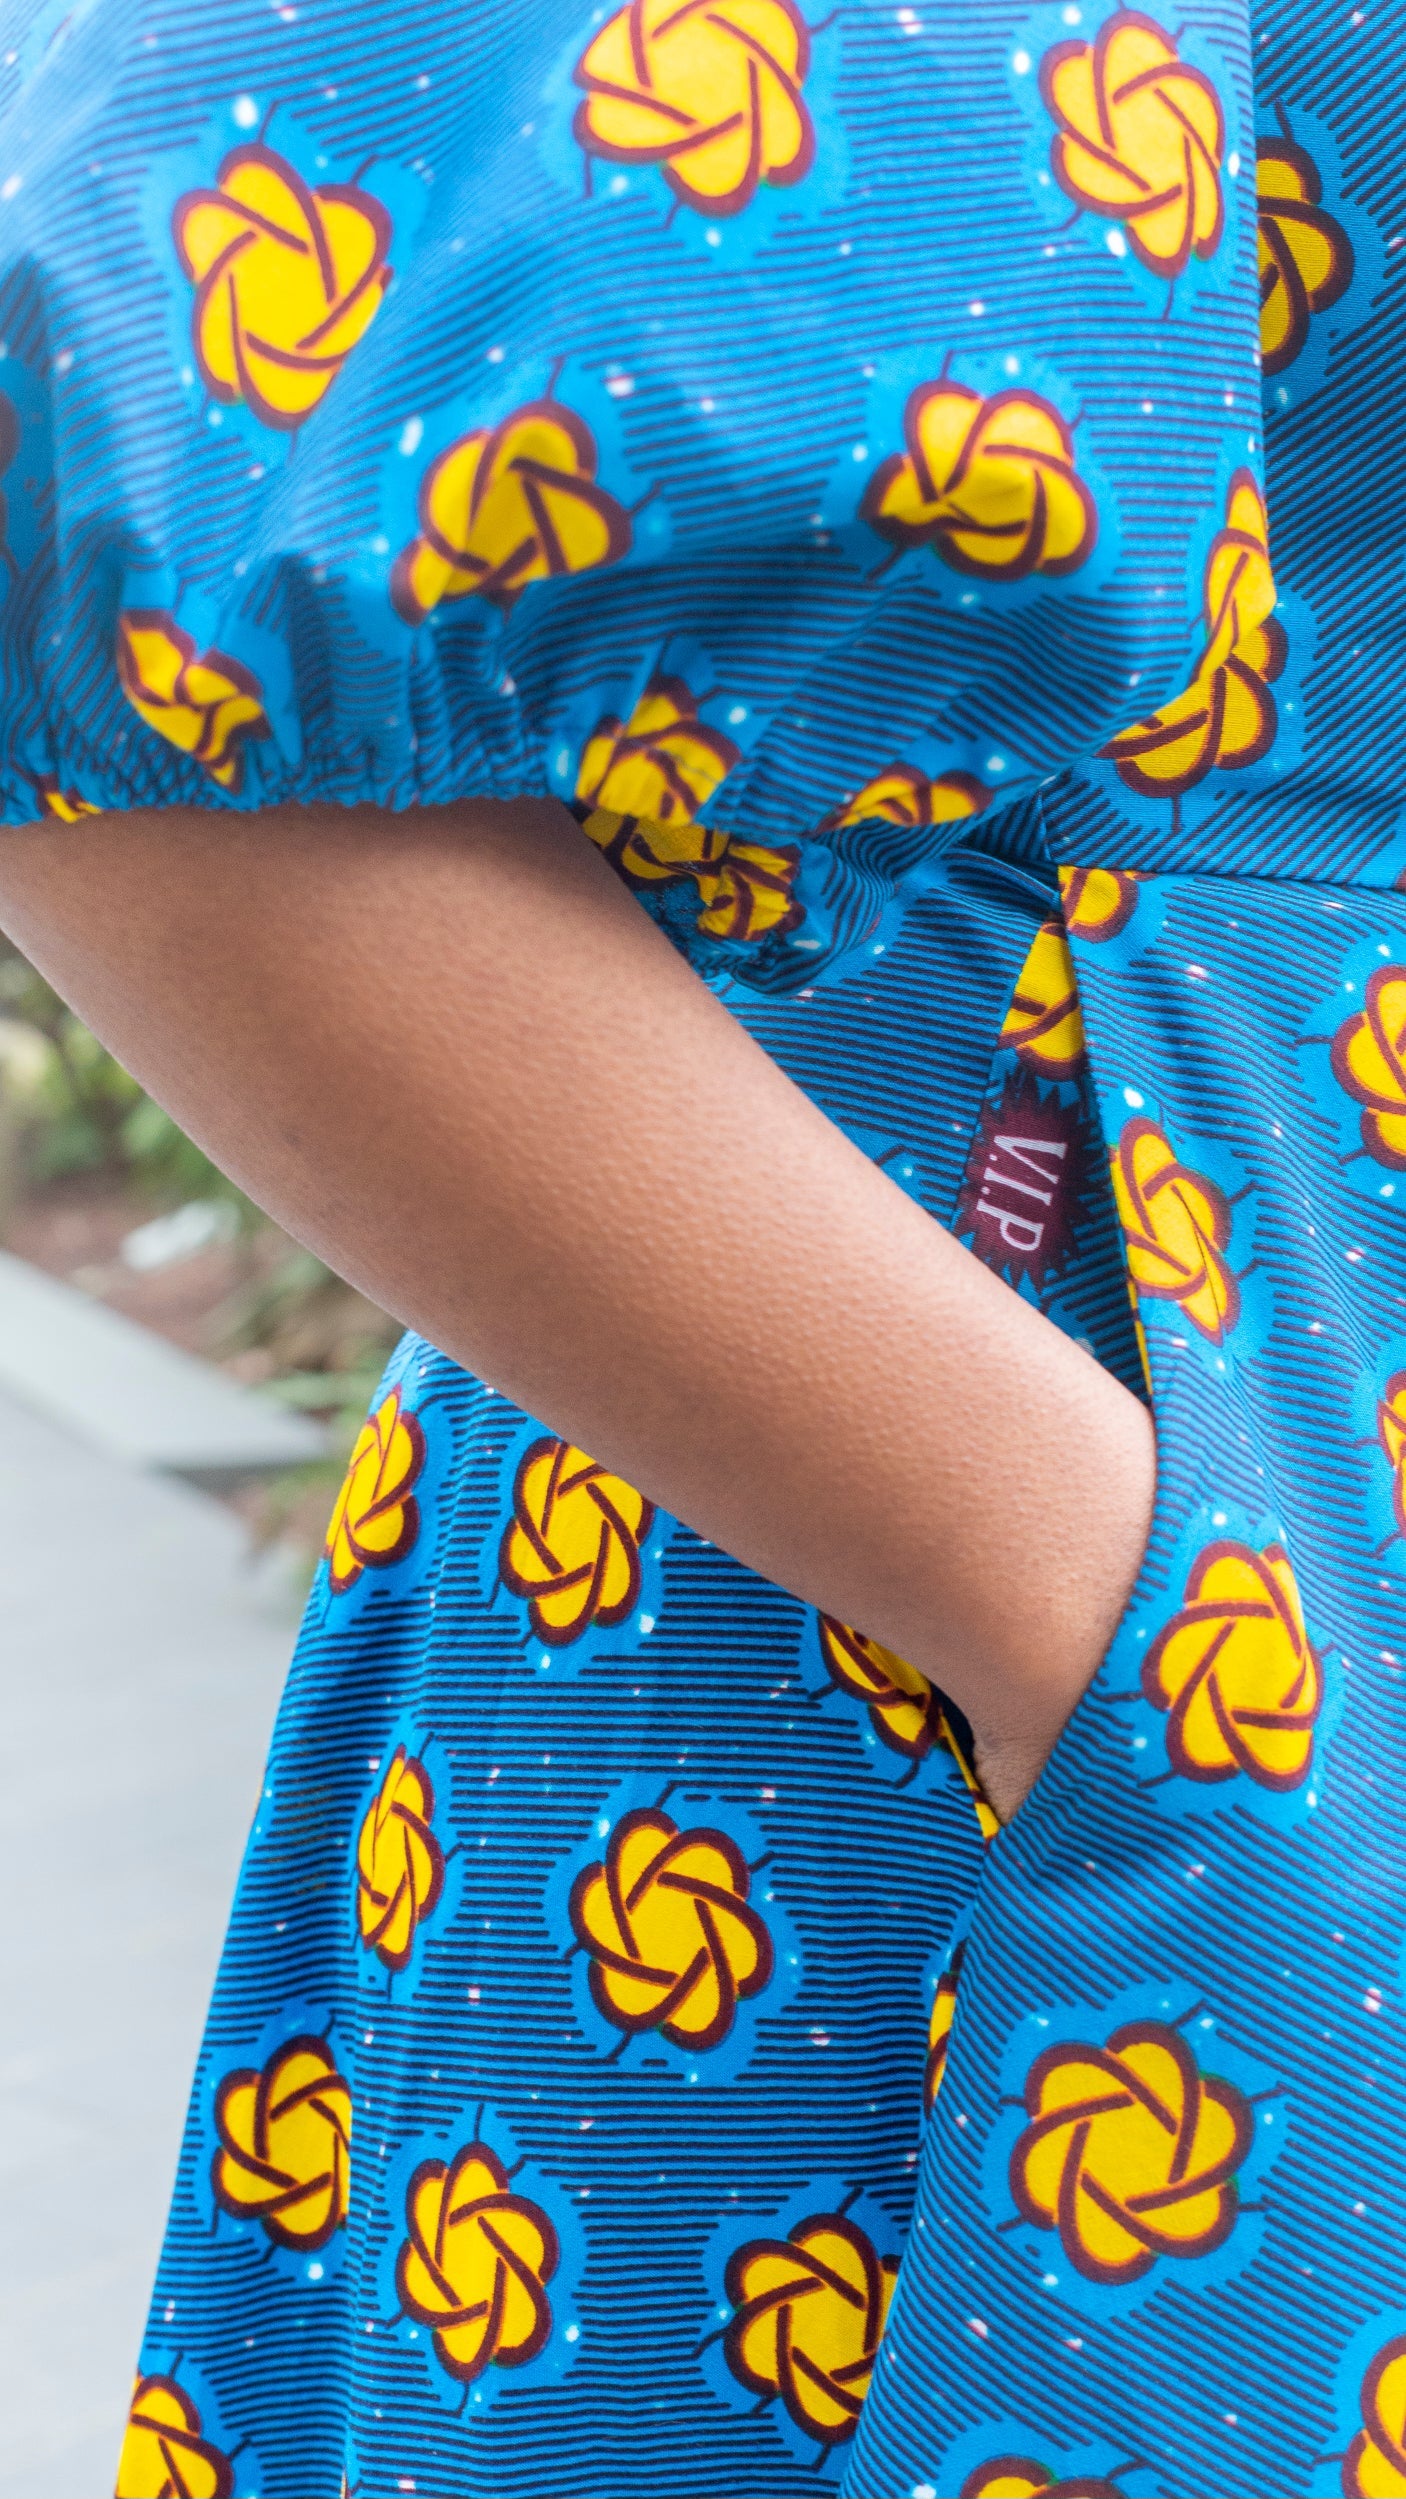 A close-up view highlighting the a practical pocket of the blue puff sleeve dress.